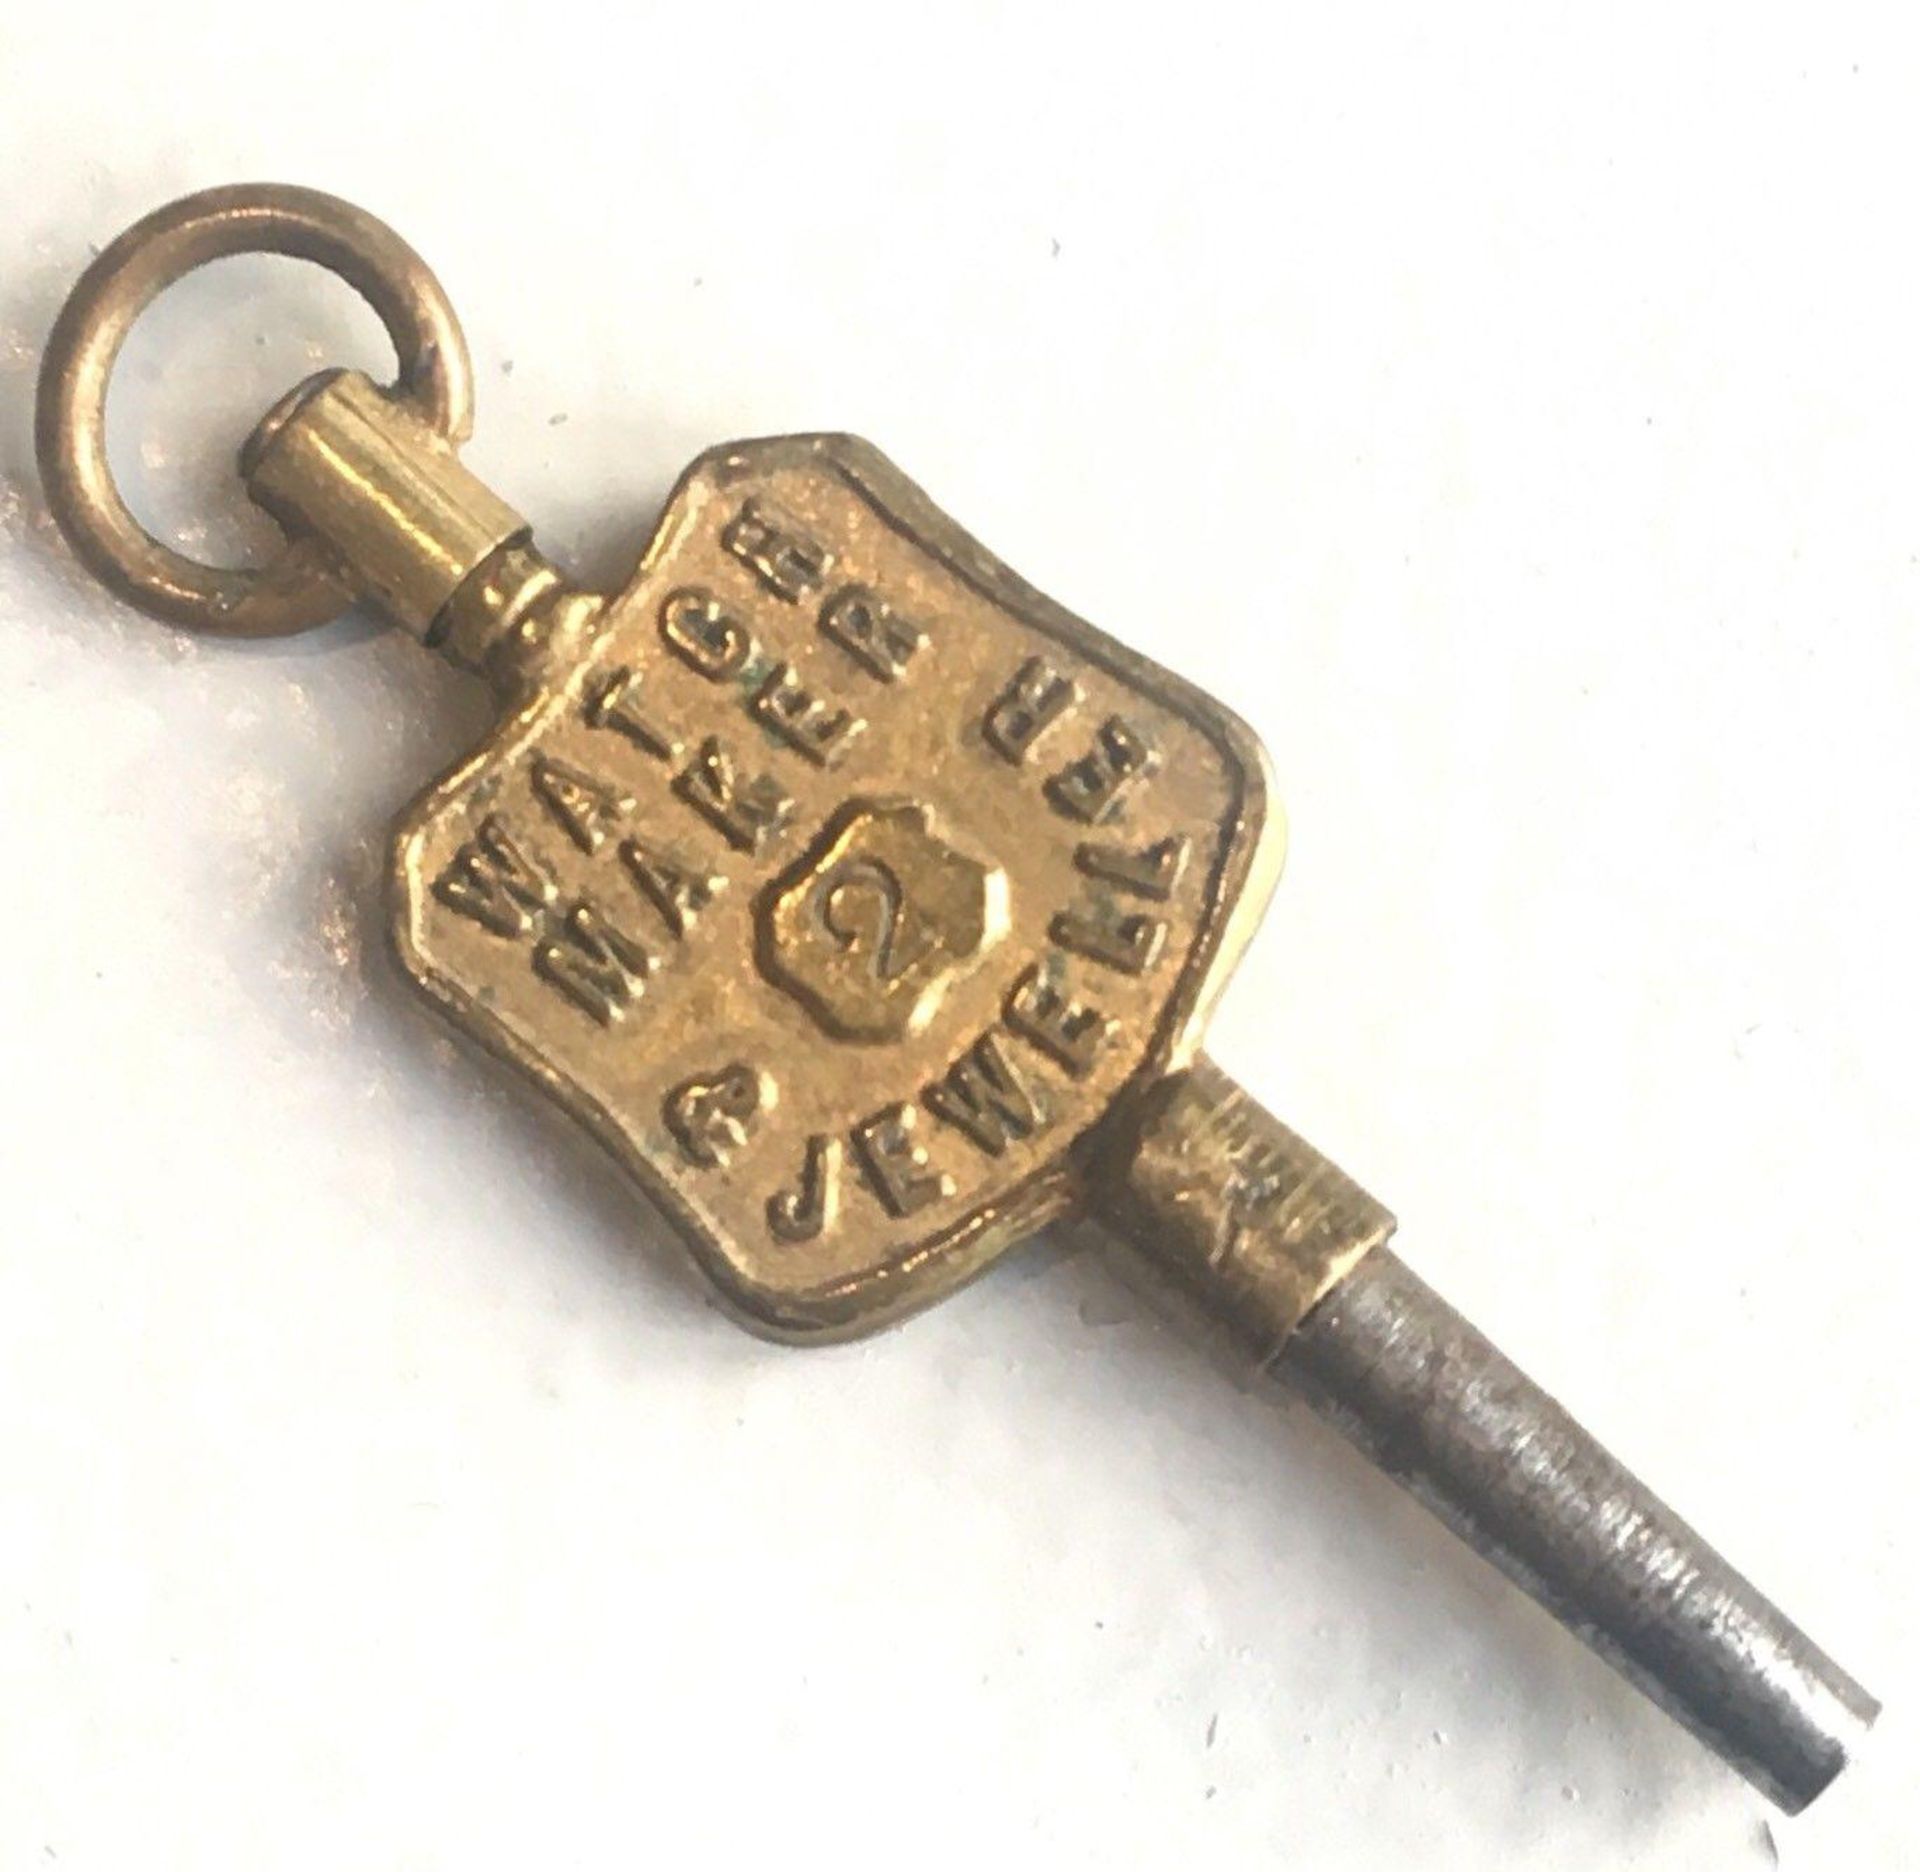 Antique Welsh Victorian watch key advertising James Keir Castle Arcade Cardiff - Image 2 of 2